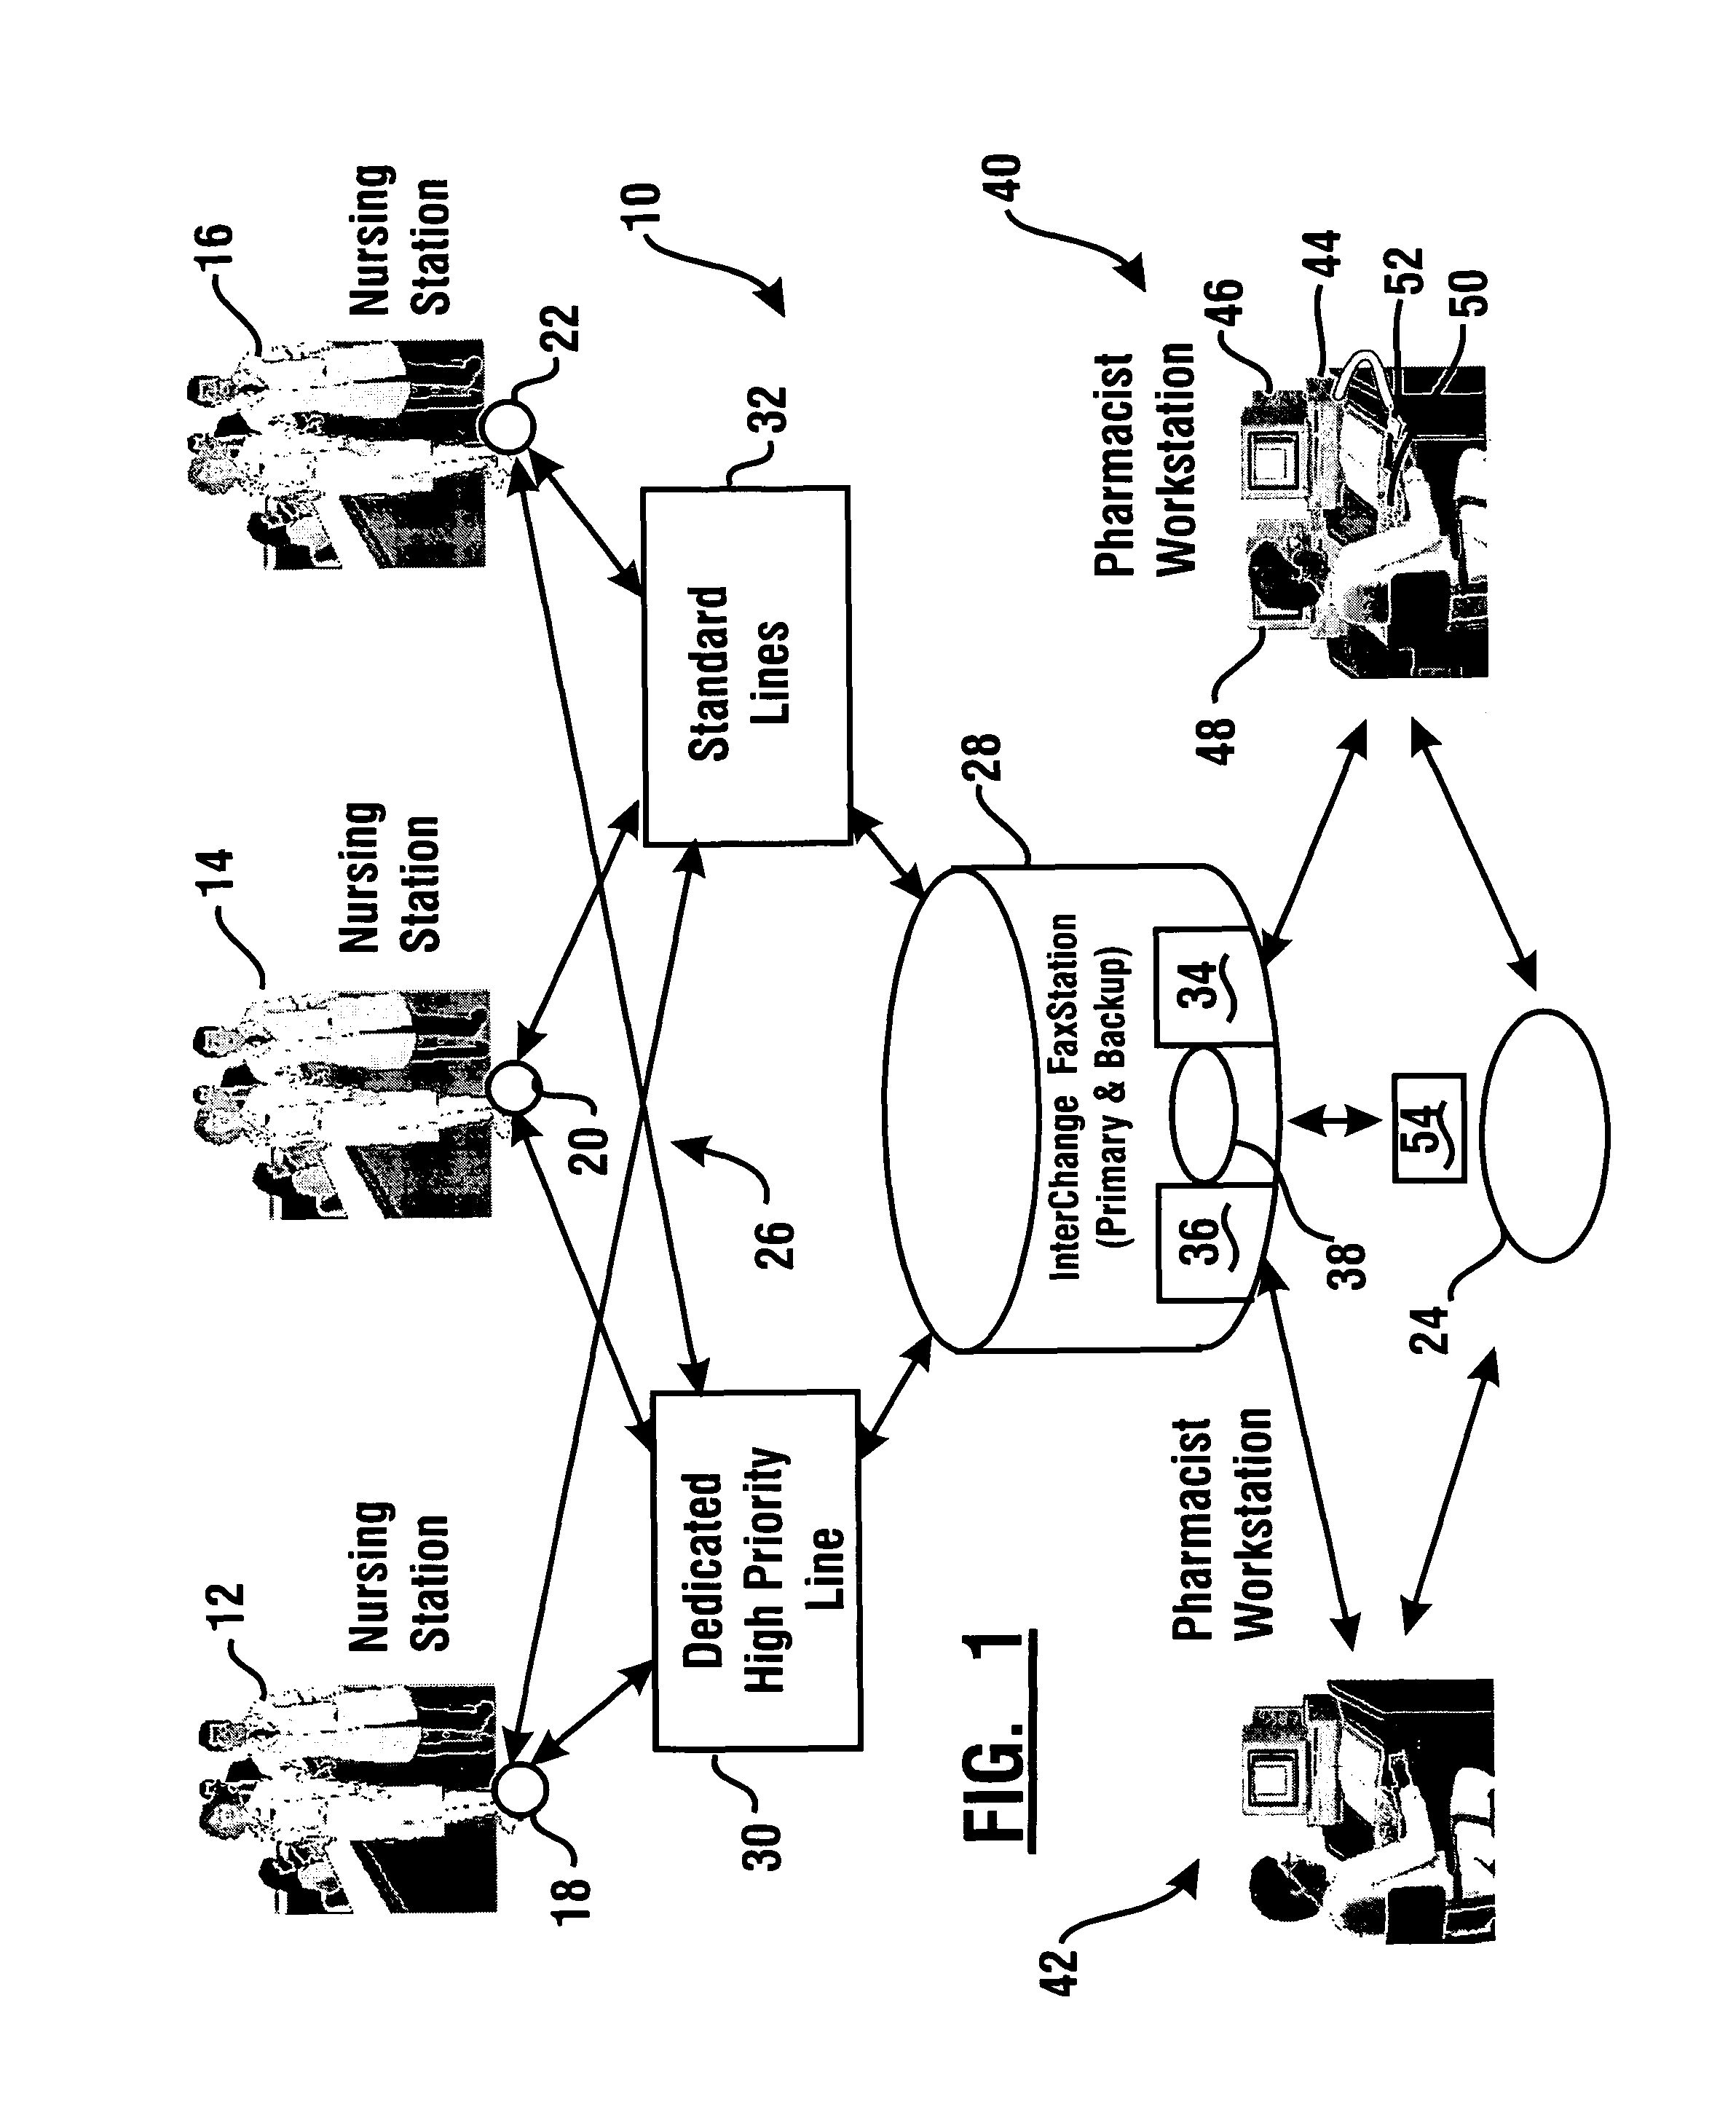 System and method for reception, analysis, and annotation of prescription data